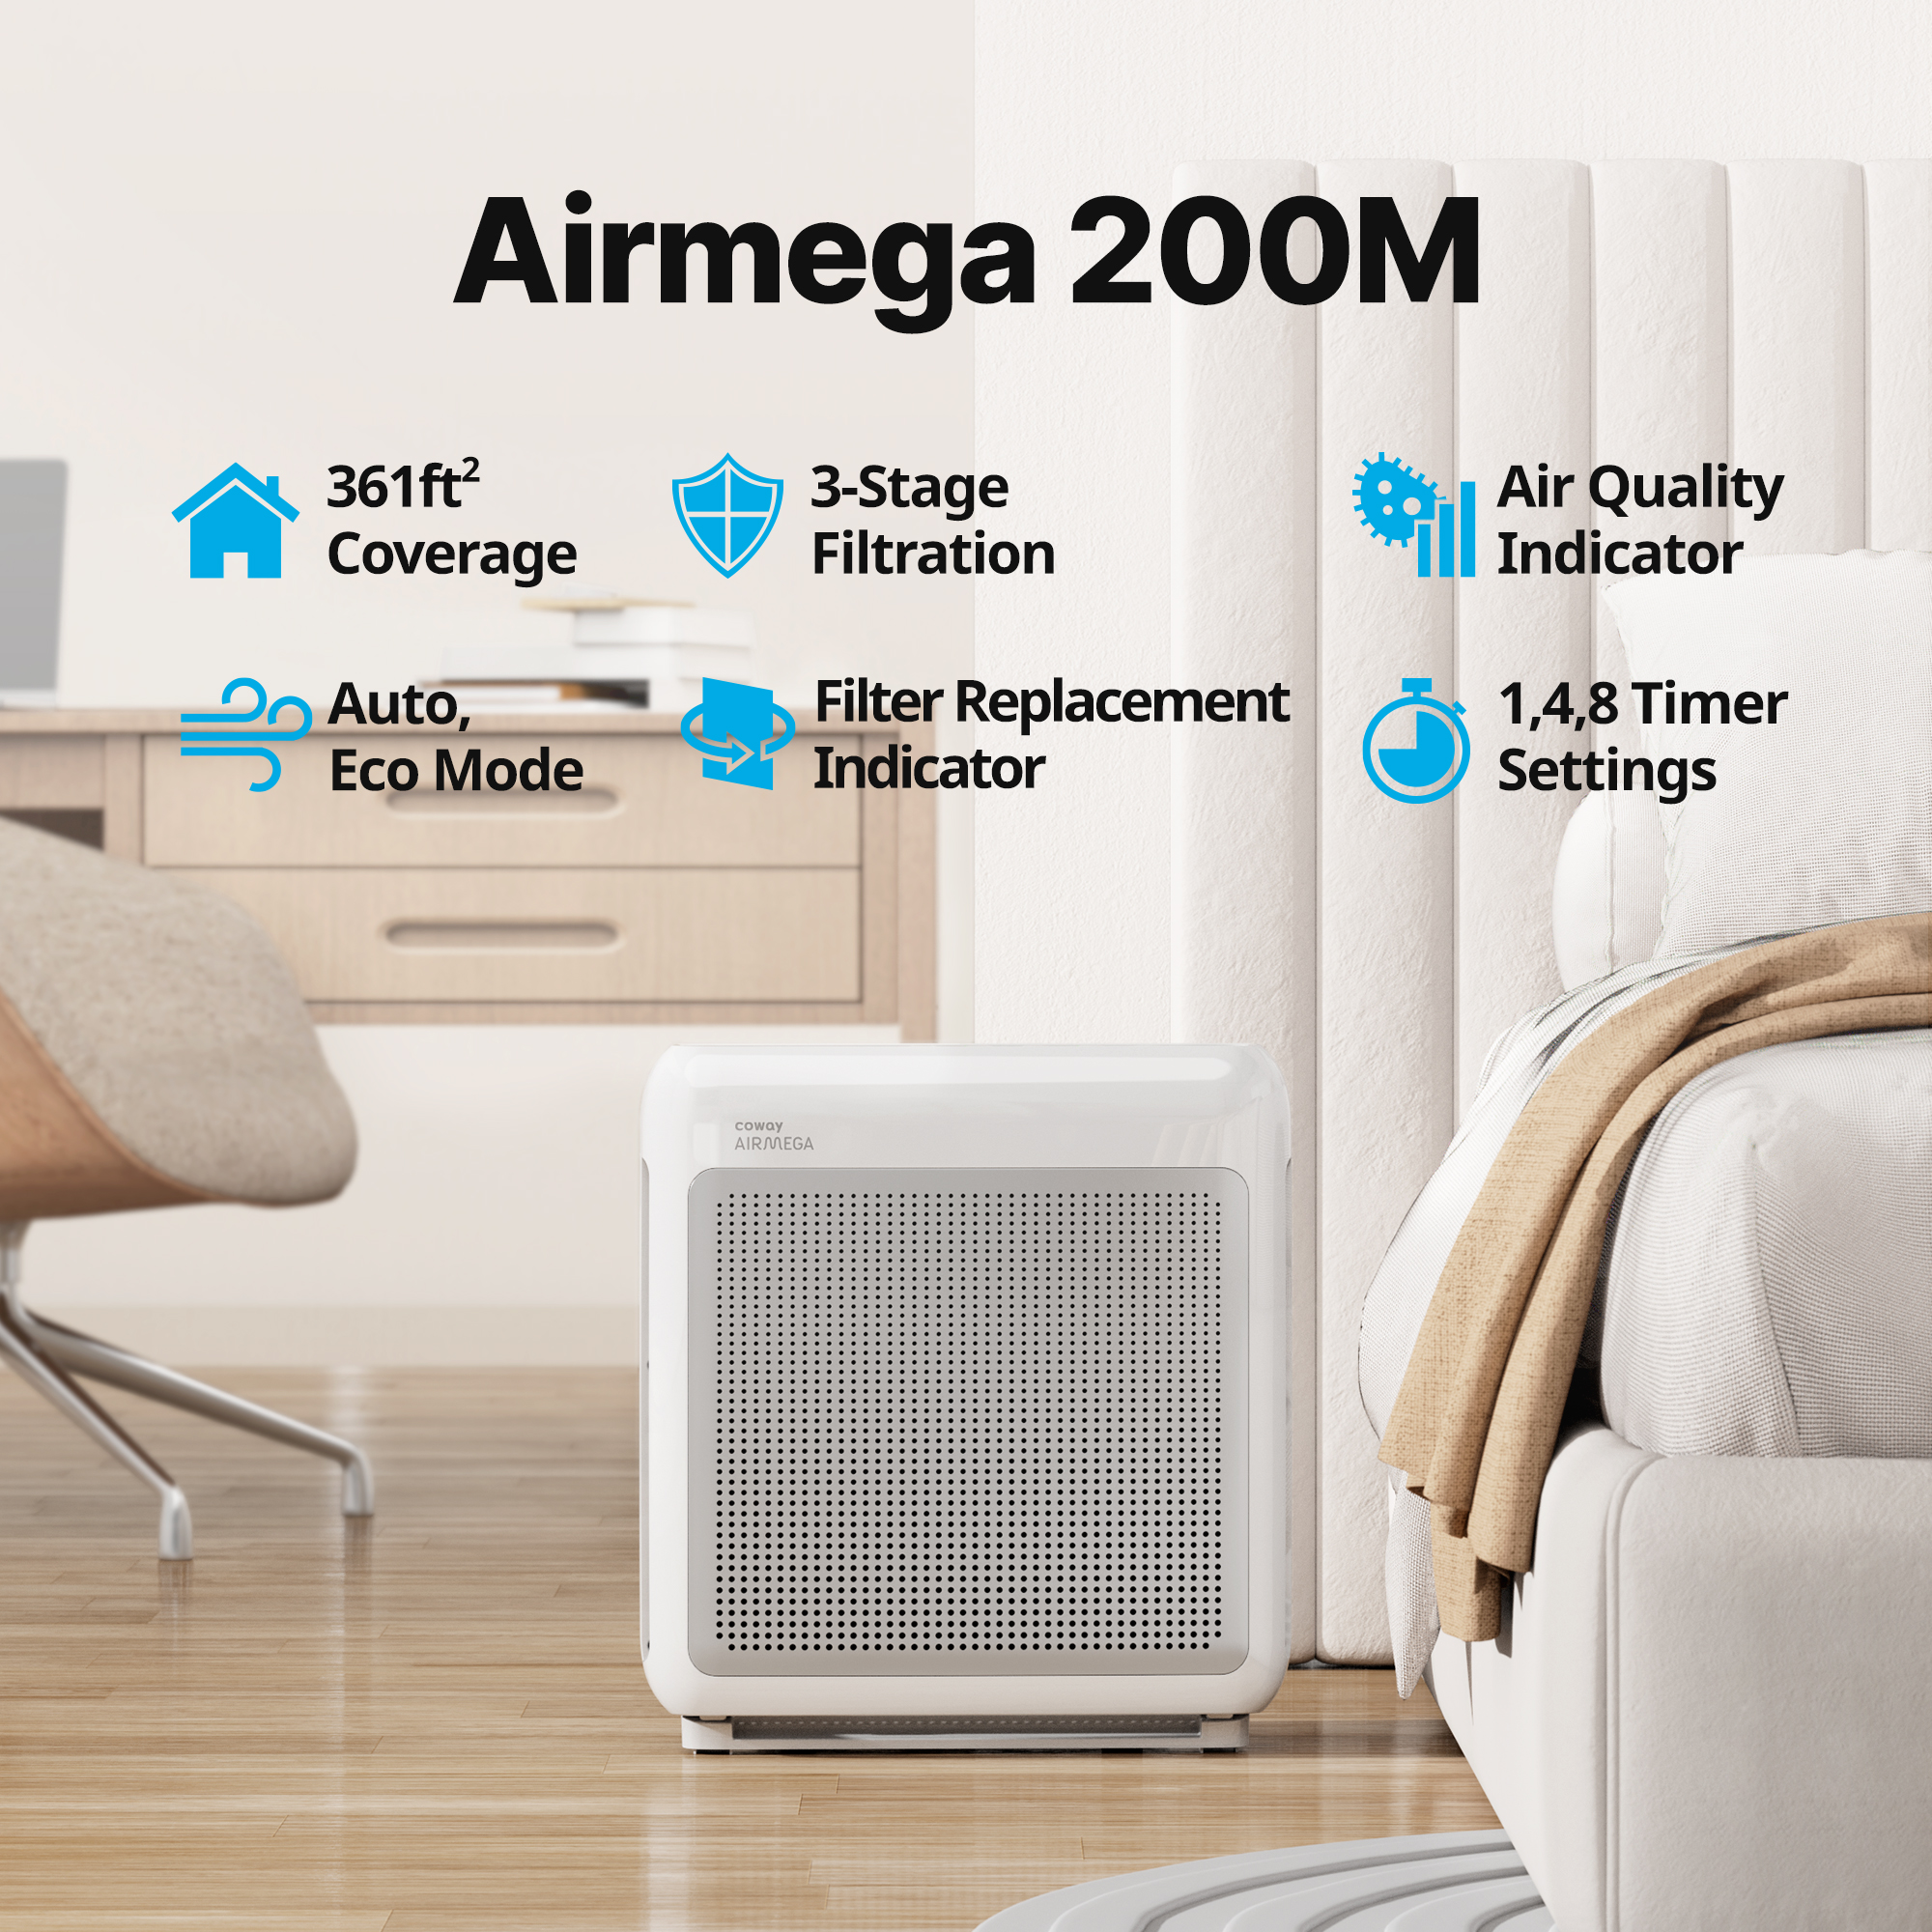 Coway Air Purifier Airmega 200M True HEPA with 361 sq. ft. Coverage in White - image 2 of 12